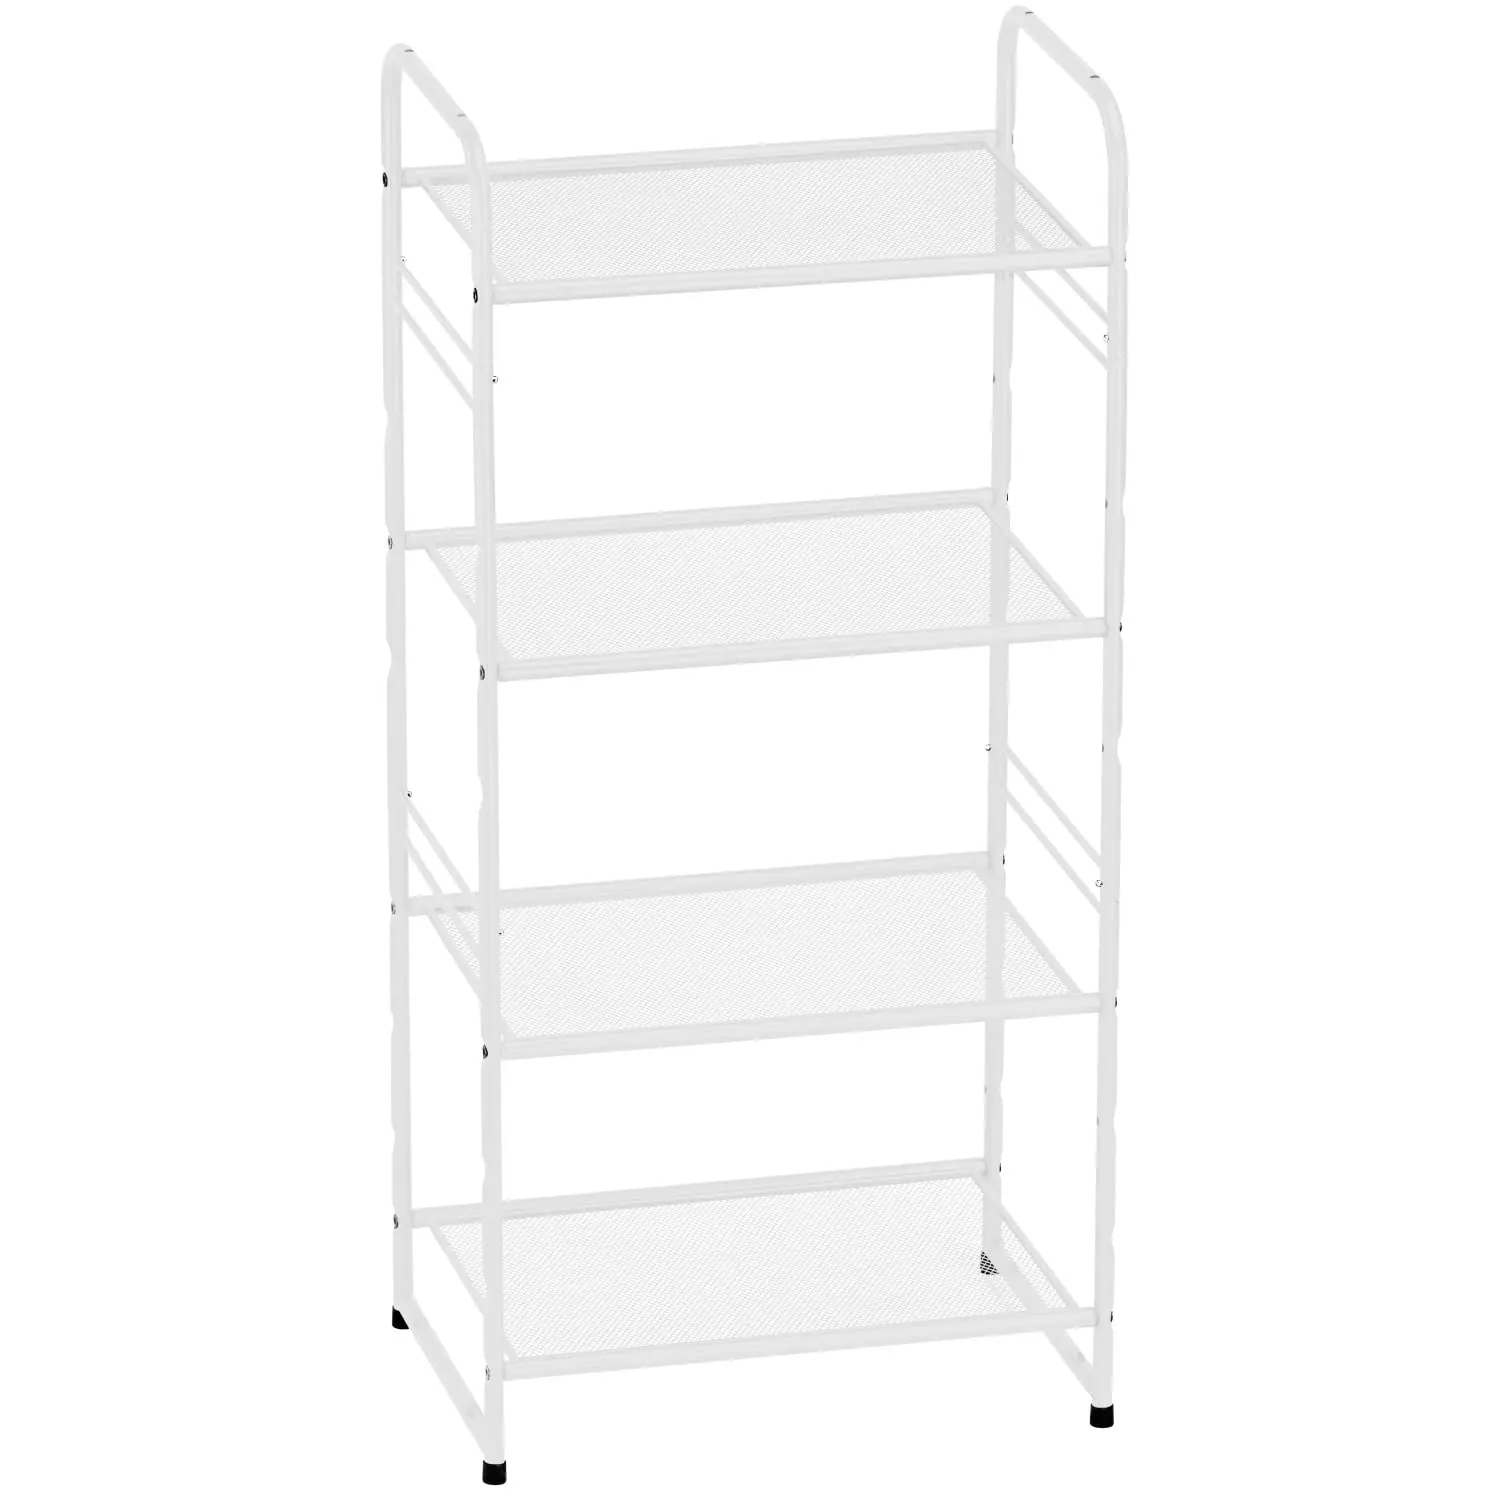 

4-Tier Storage Rack with Shelf Wire Shelving Unit Storage Rack, Stackable Extendable with Adjustable Shelf,White